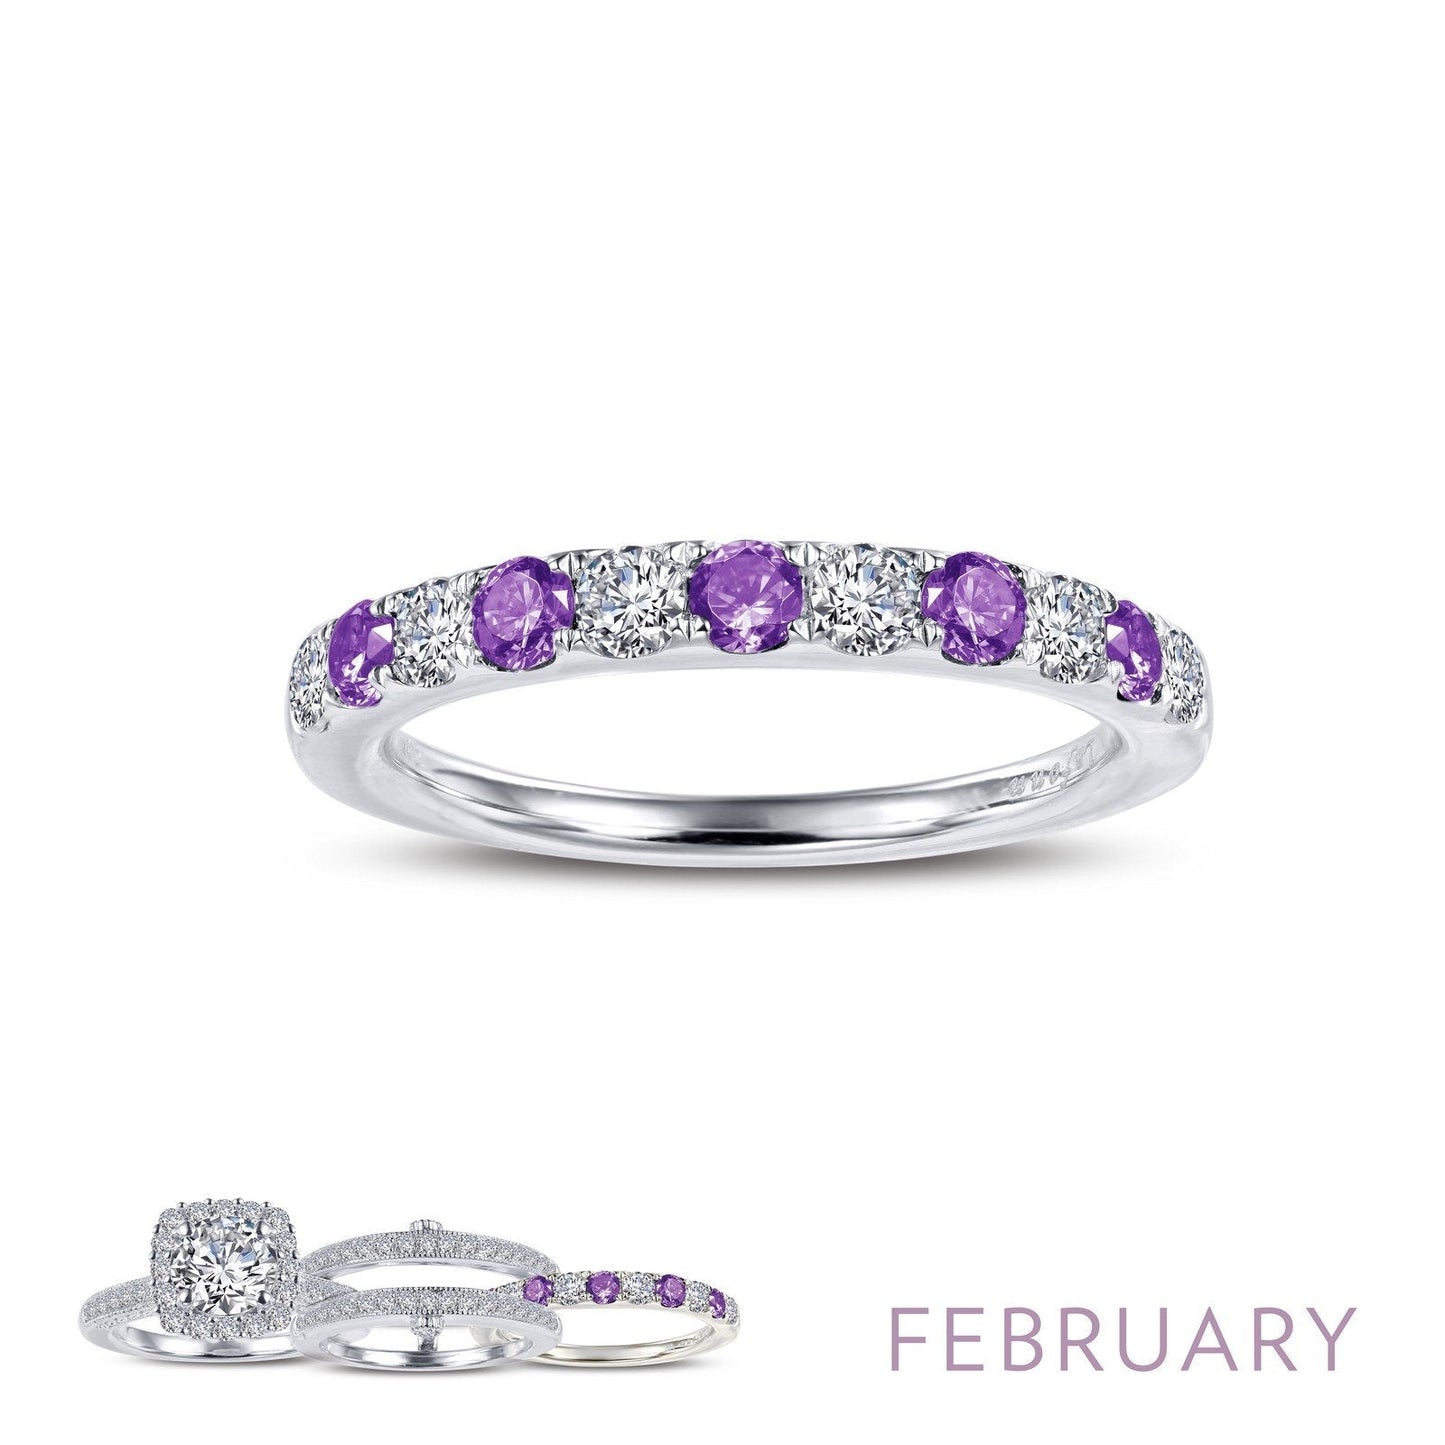 Lafonn February Birthstone Ring FEBRUARY RINGS Size 6 Platinum 0.51cts CTS Approx.2.7mm(W)